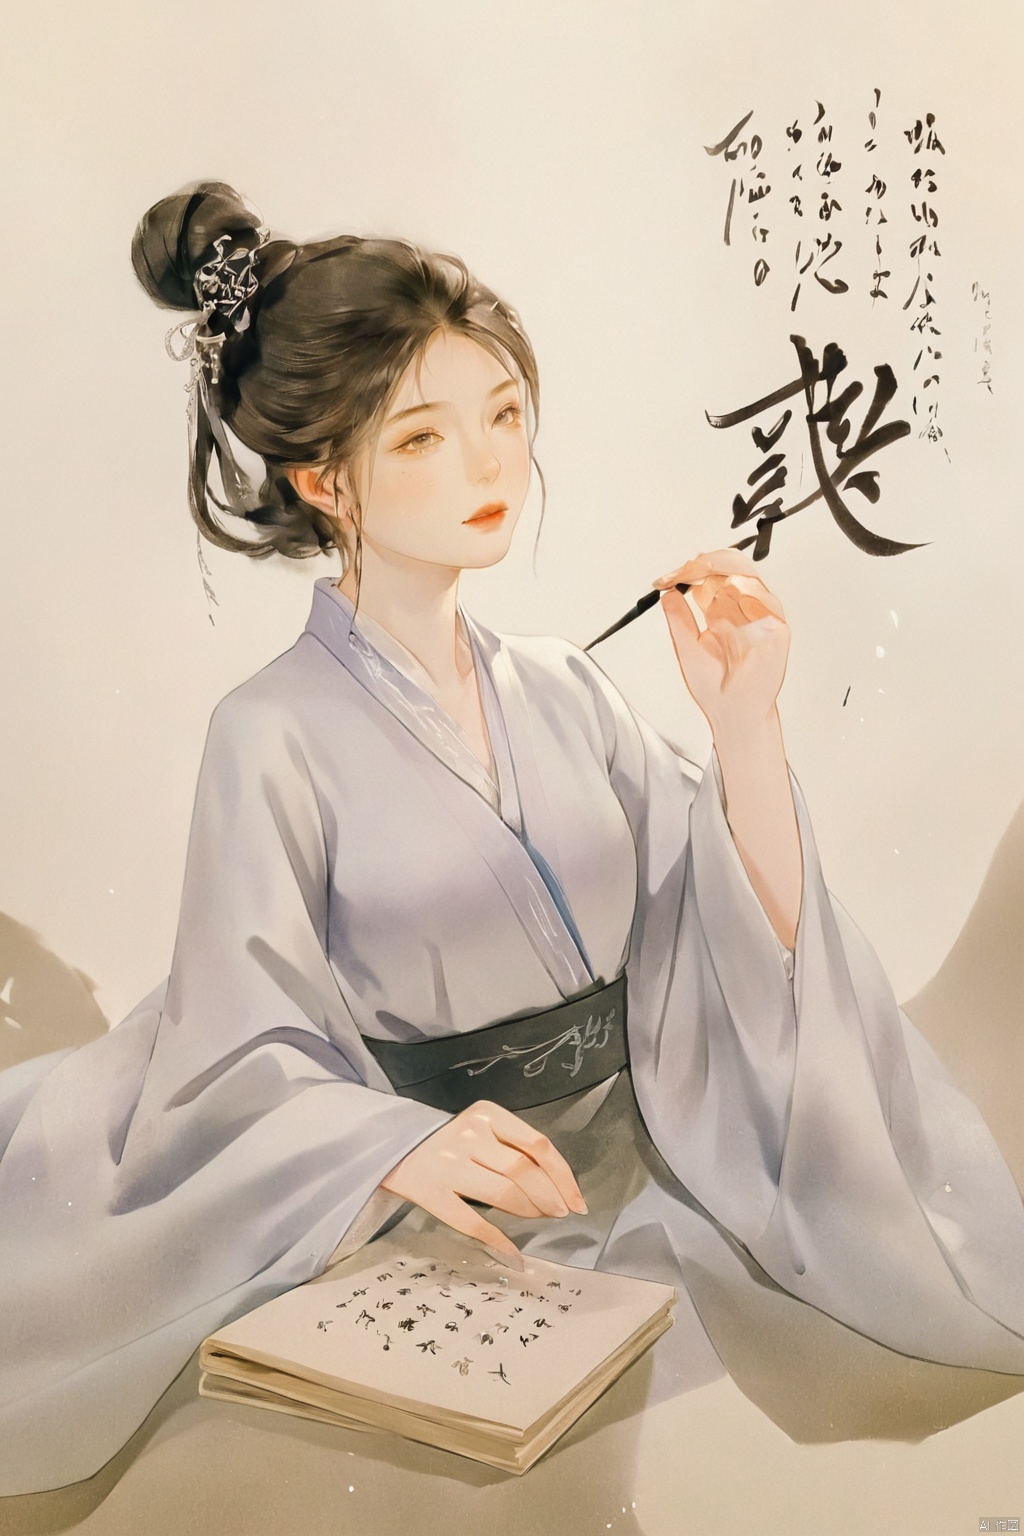  Photorealism of Photography,close-up photo,Dreamlike,Calligraphy,Chinese Paper Art,high detail,super wide angle,full body,first-person view,